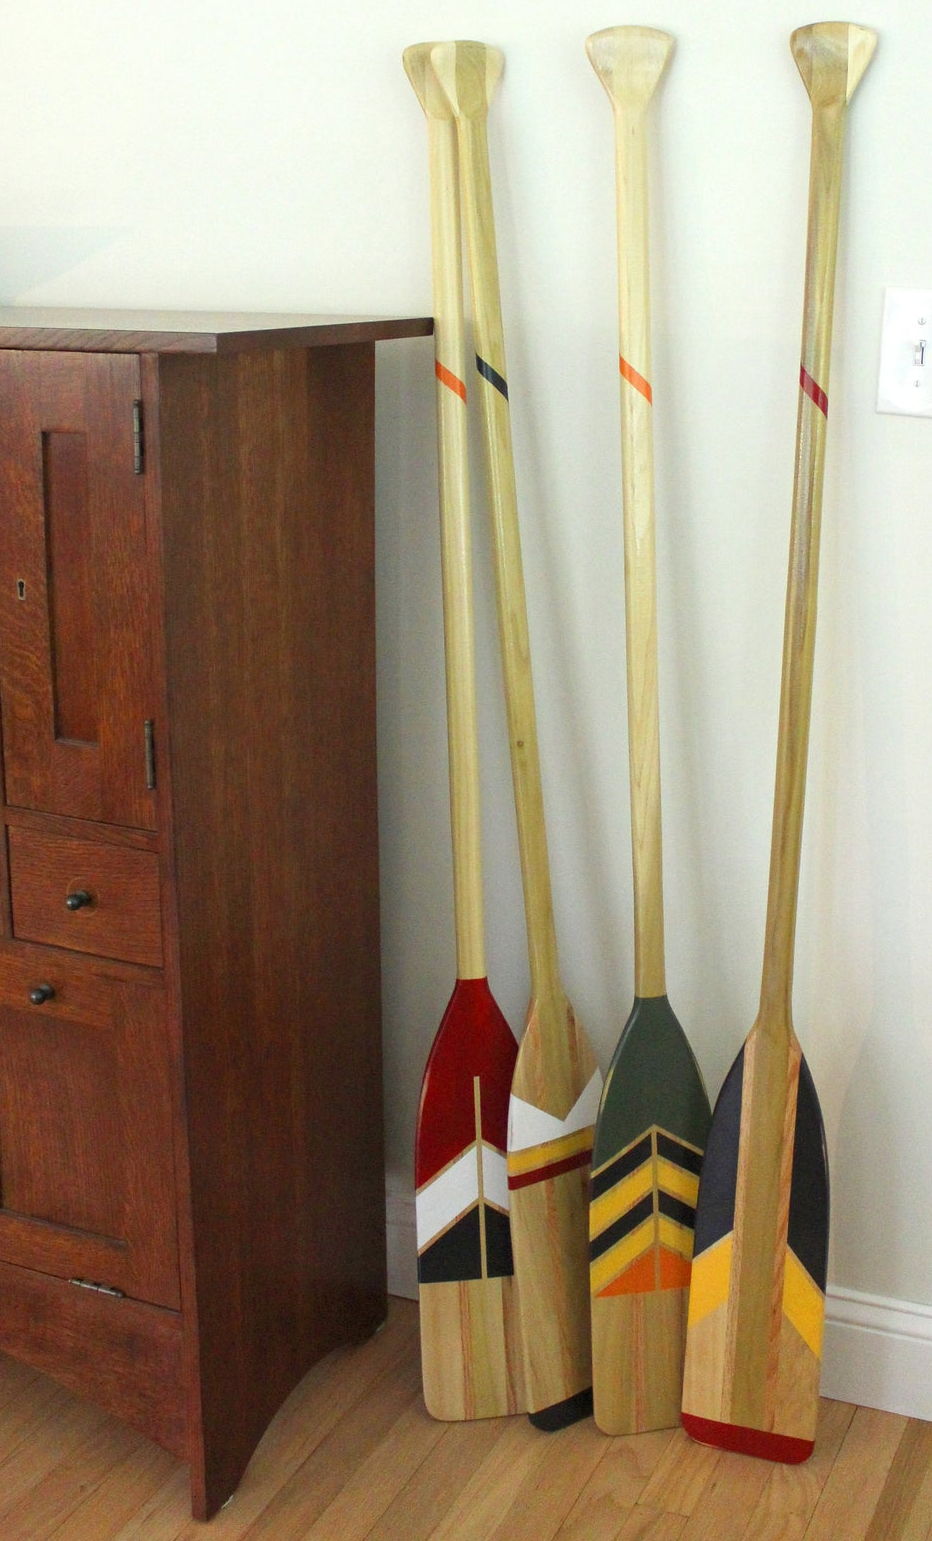 four different oars